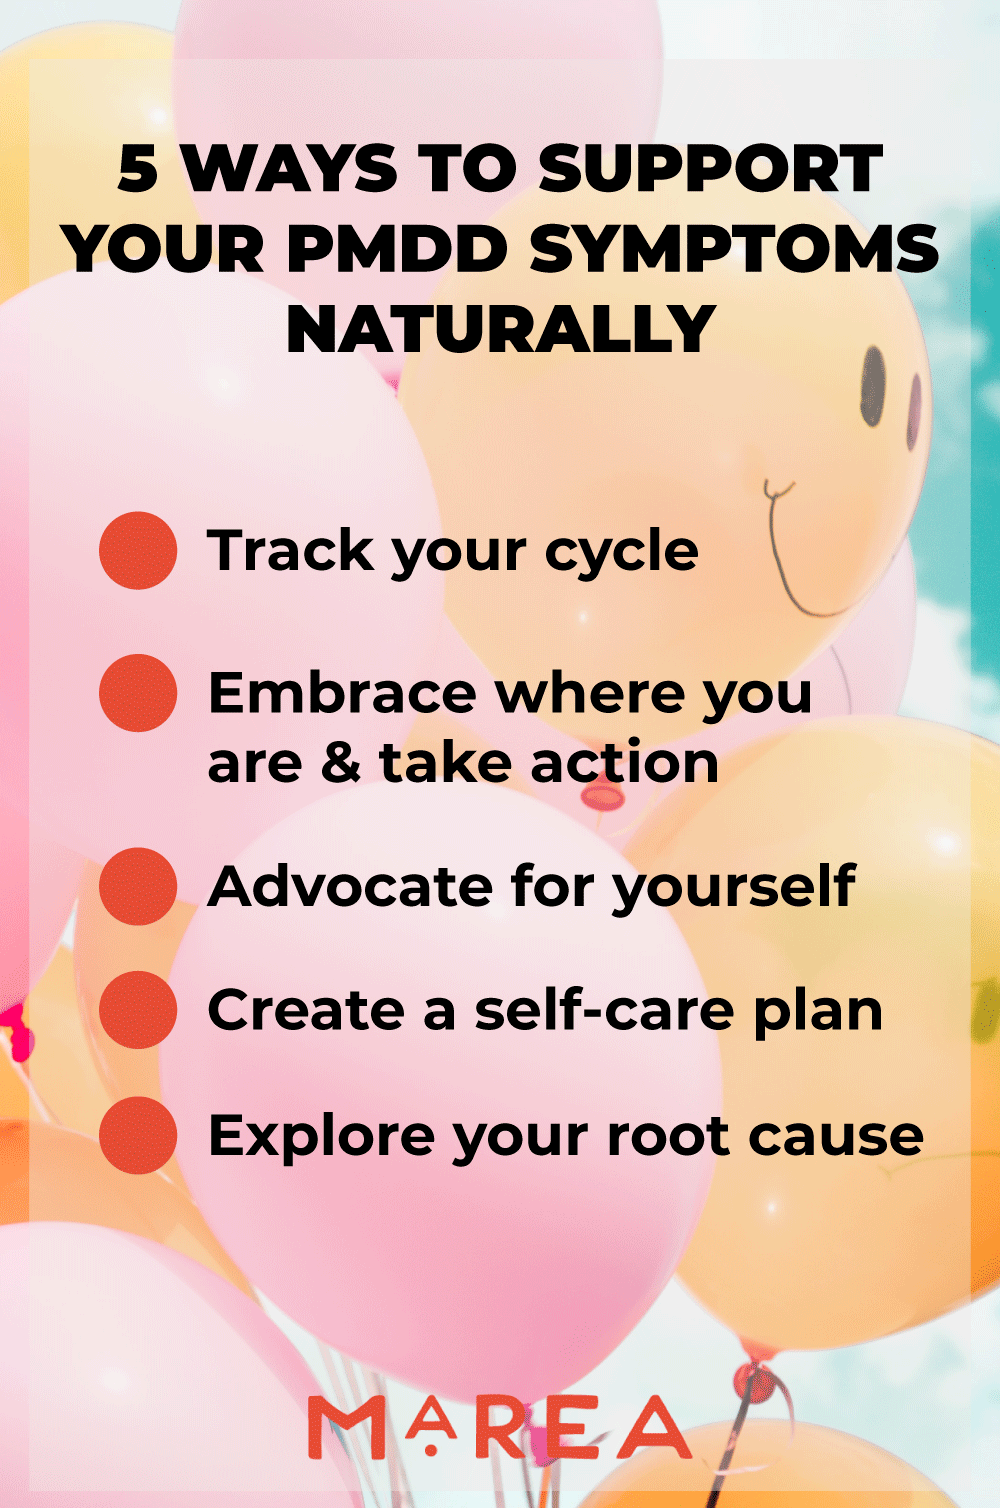 5 Ways to Support Your PMDD Symptoms Naturally